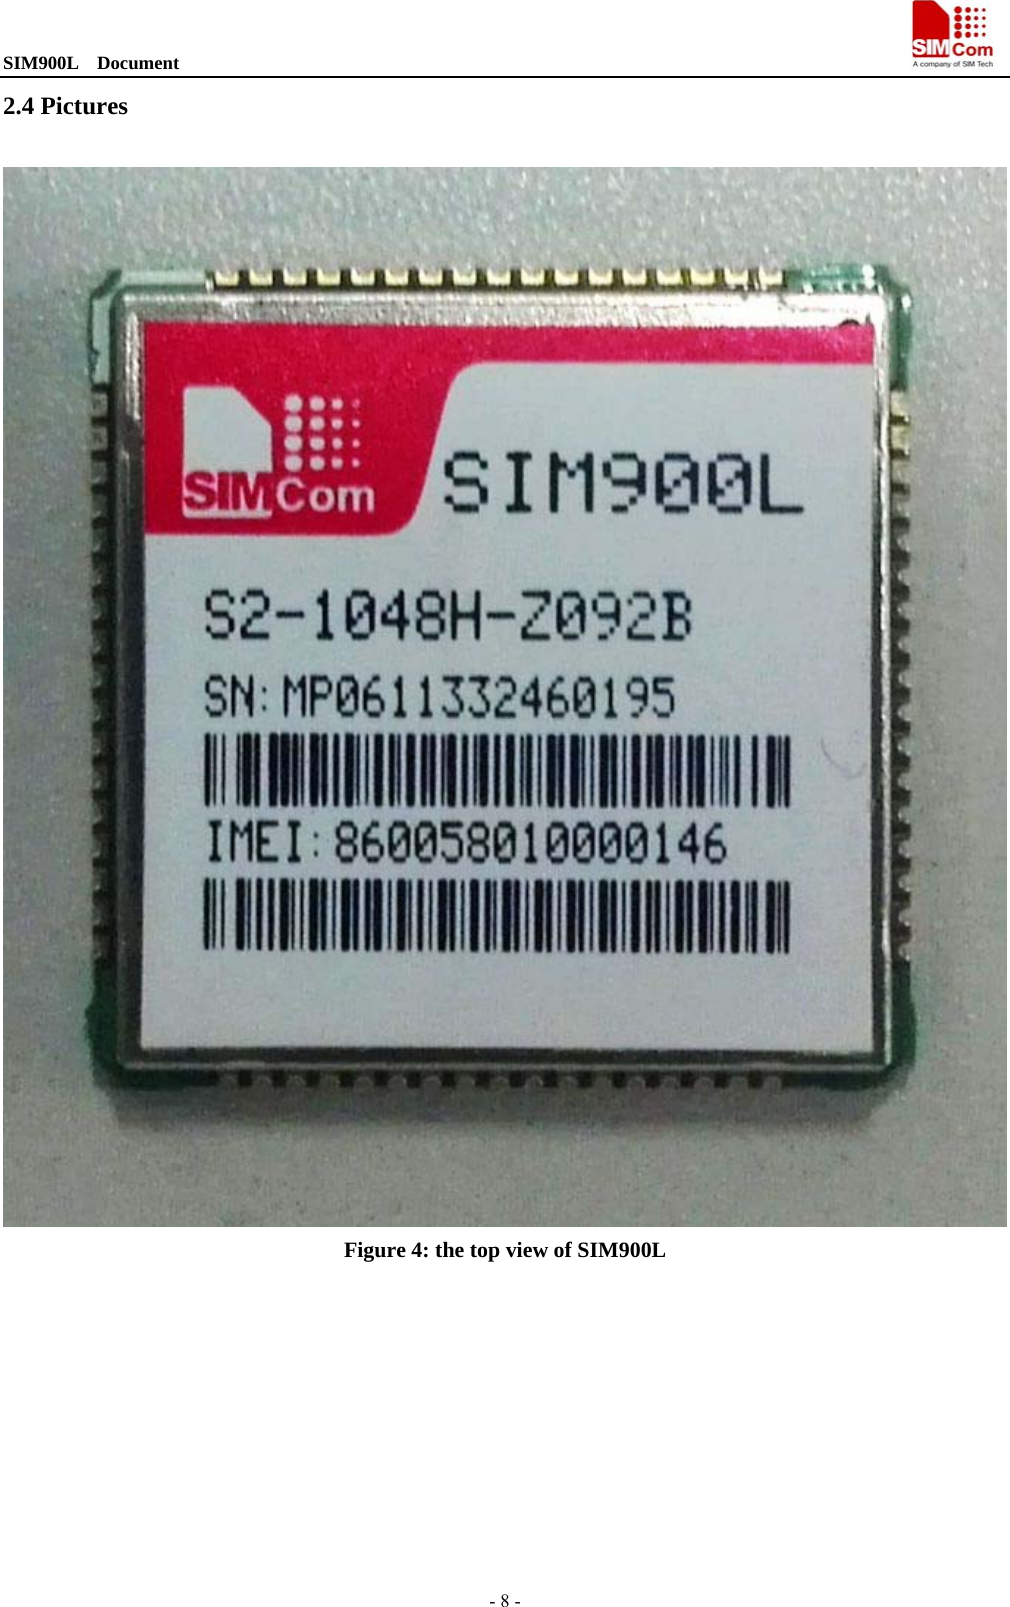 SIM900L  Document                                                                                - 8 - 2.4 Pictures  Figure 4: the top view of SIM900L   